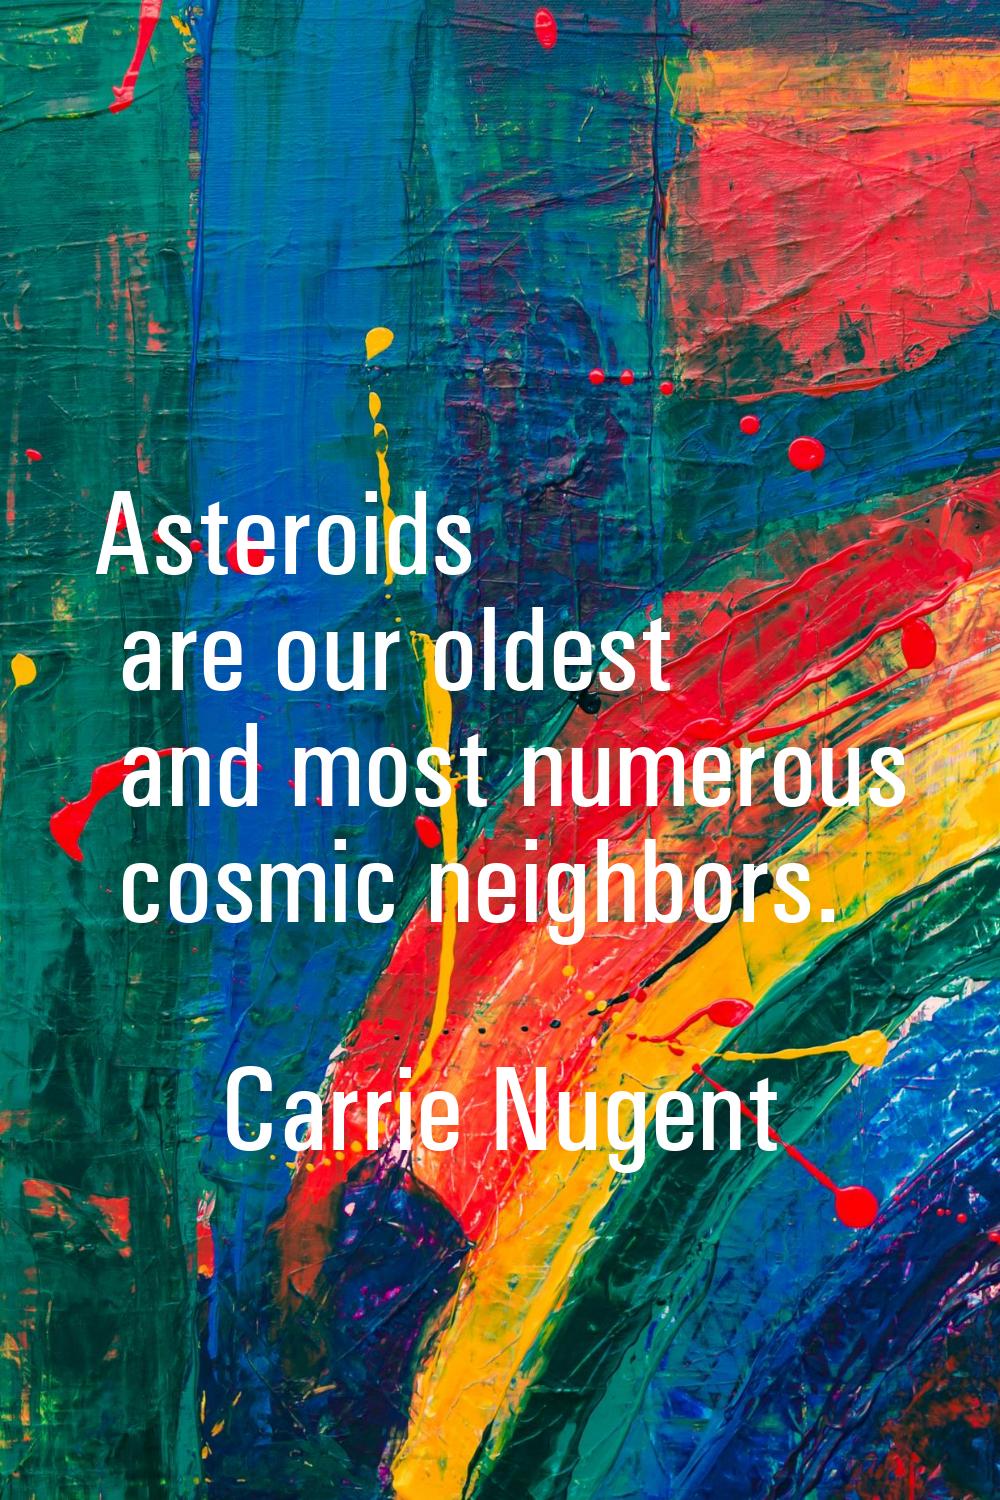 Asteroids are our oldest and most numerous cosmic neighbors.